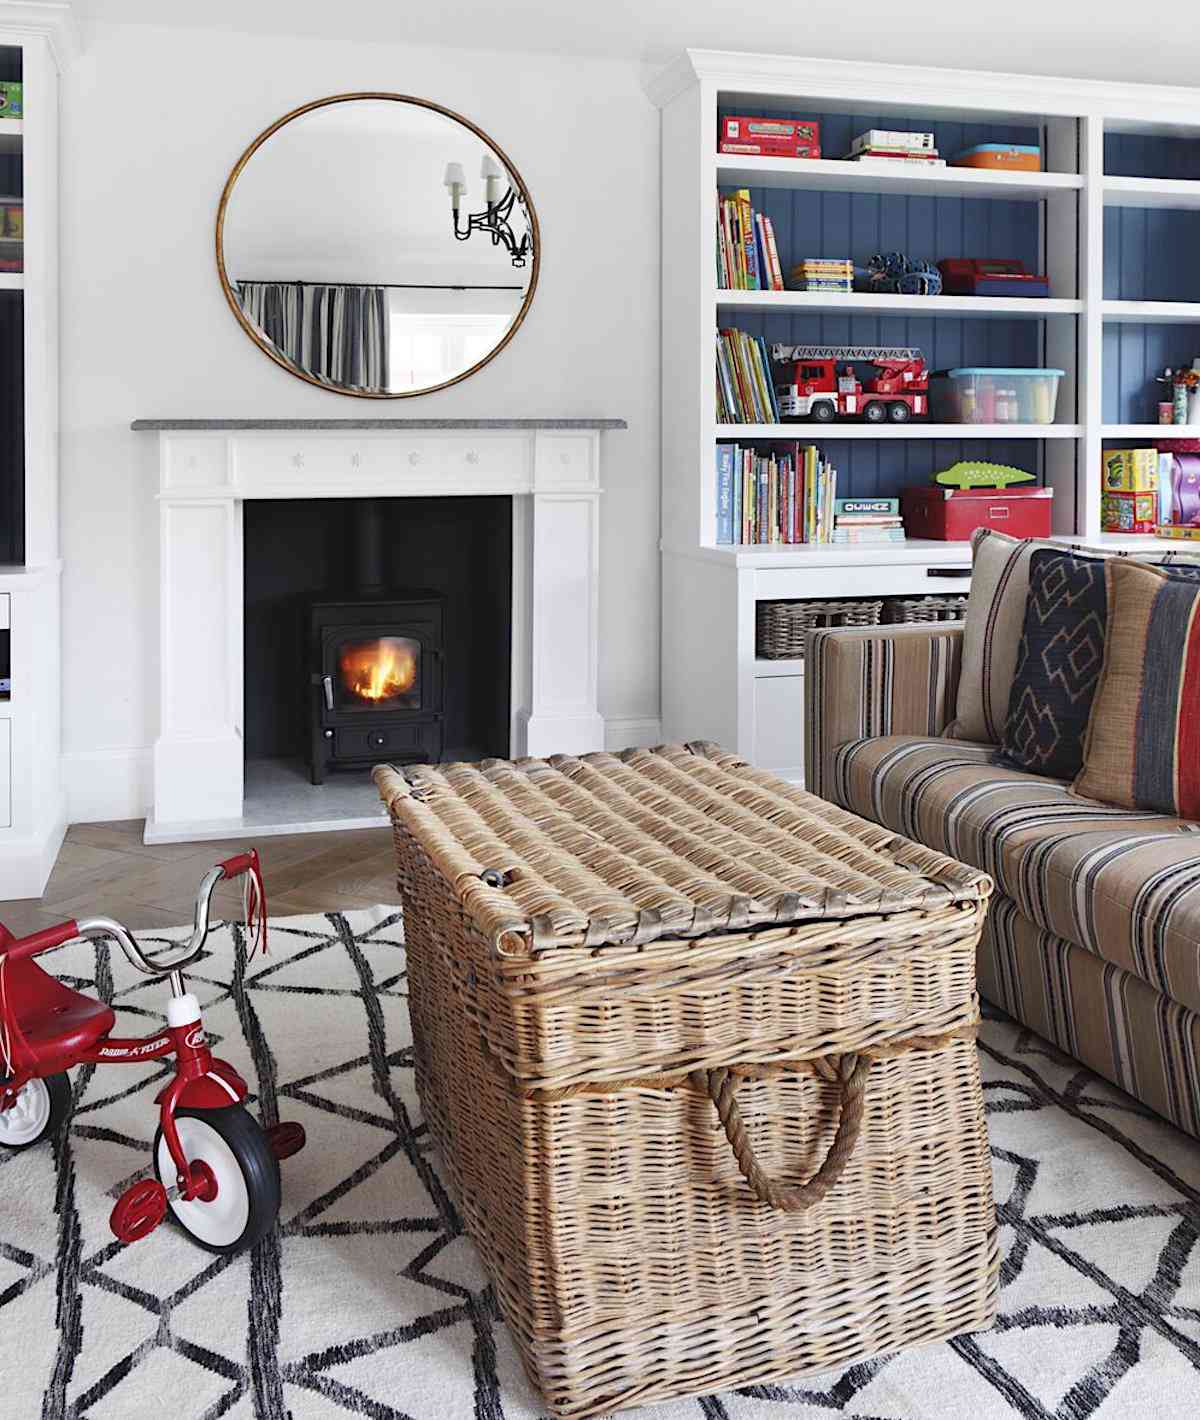 wicker style storage basket used as living room table